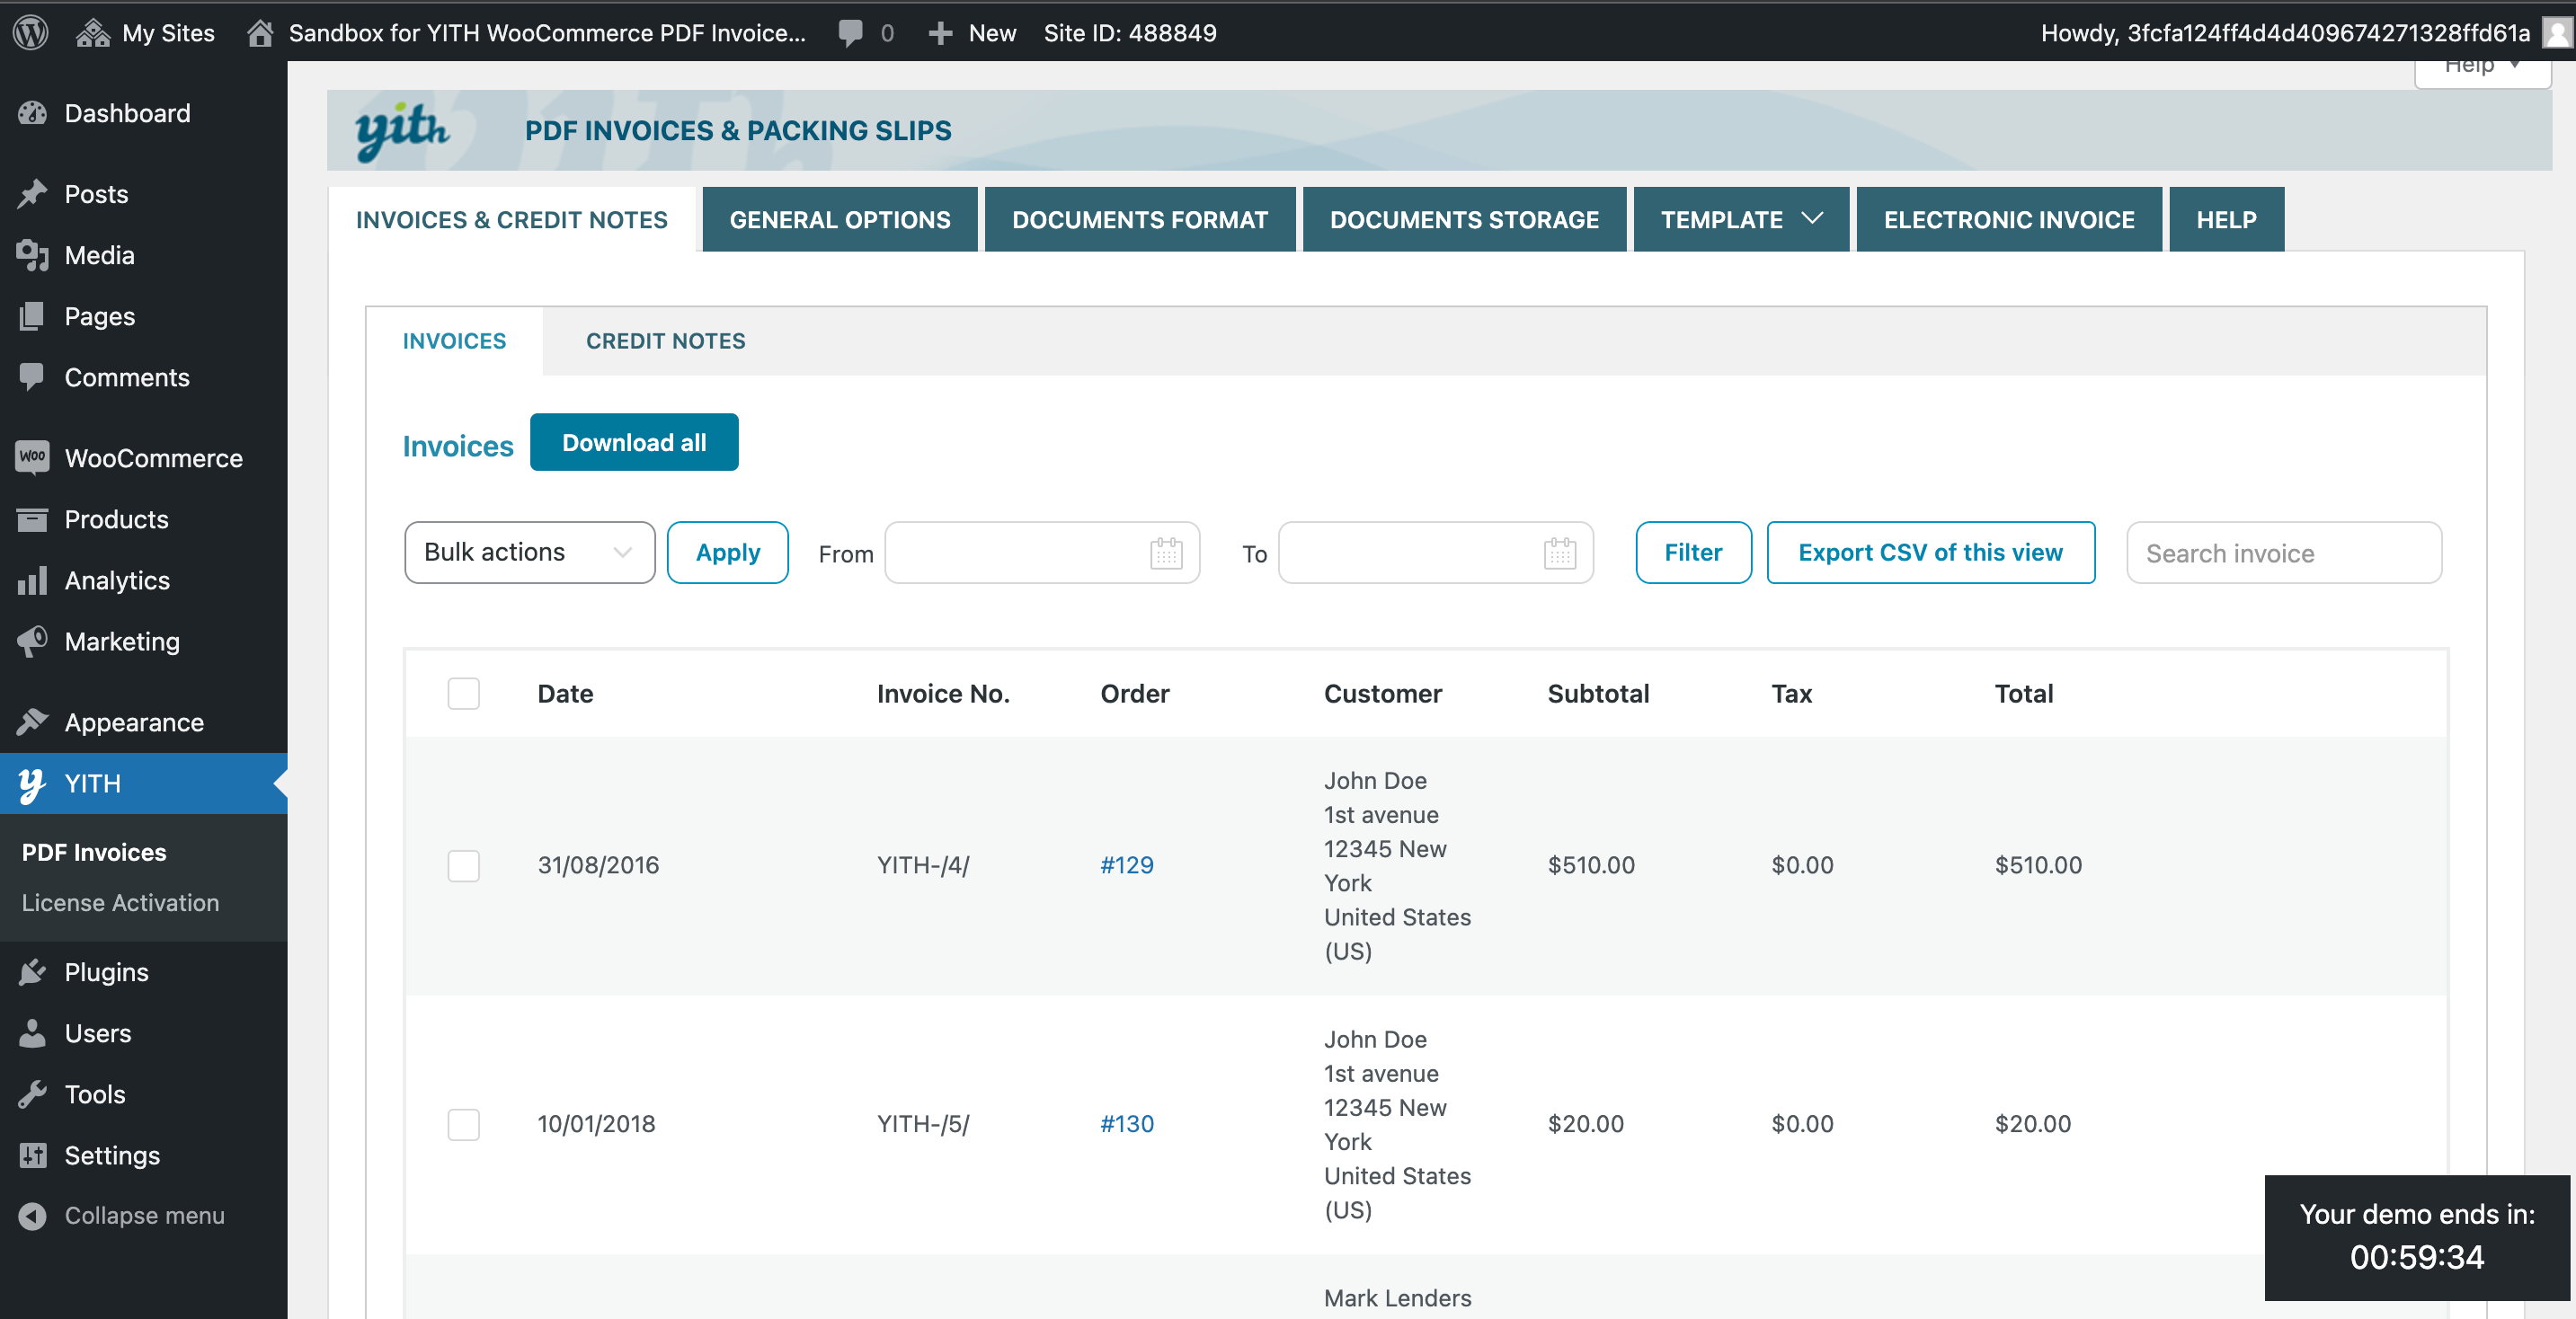 YITH's PDF Invoice and Shipping List plugin is another option to examine